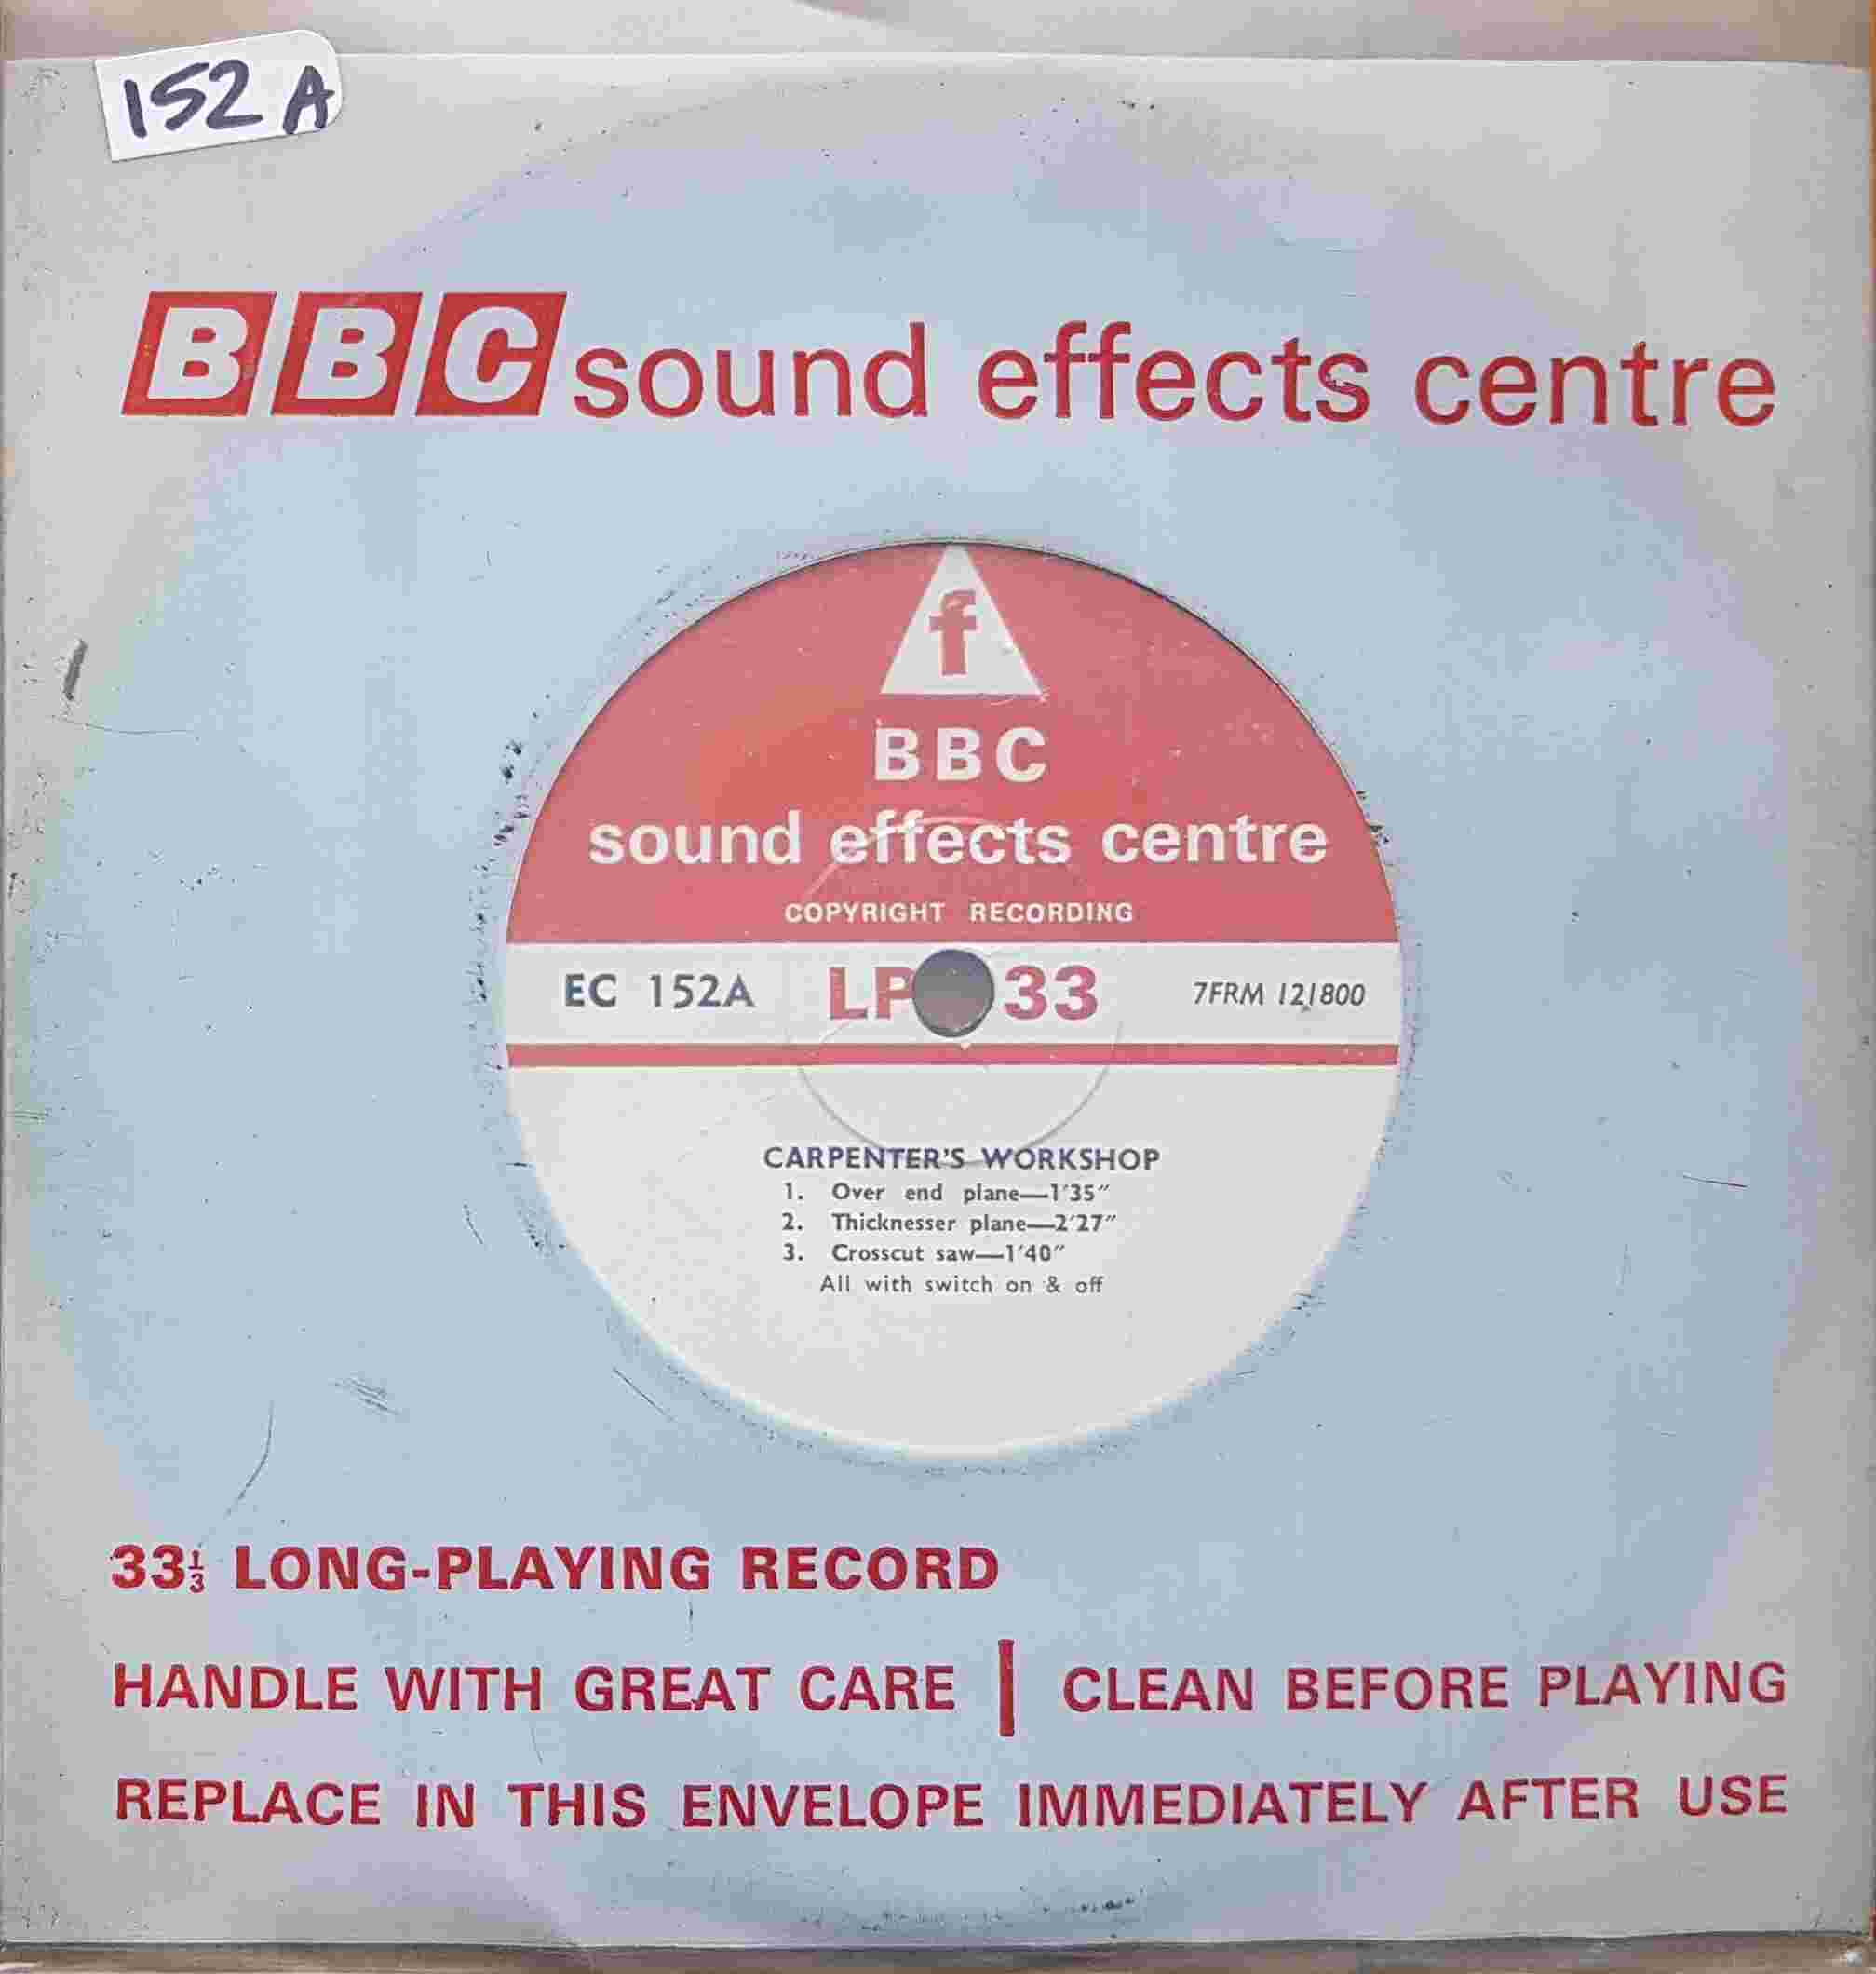 Picture of EC 152A Carpenter's workshop (All with switch on & off) by artist Not registered from the BBC records and Tapes library